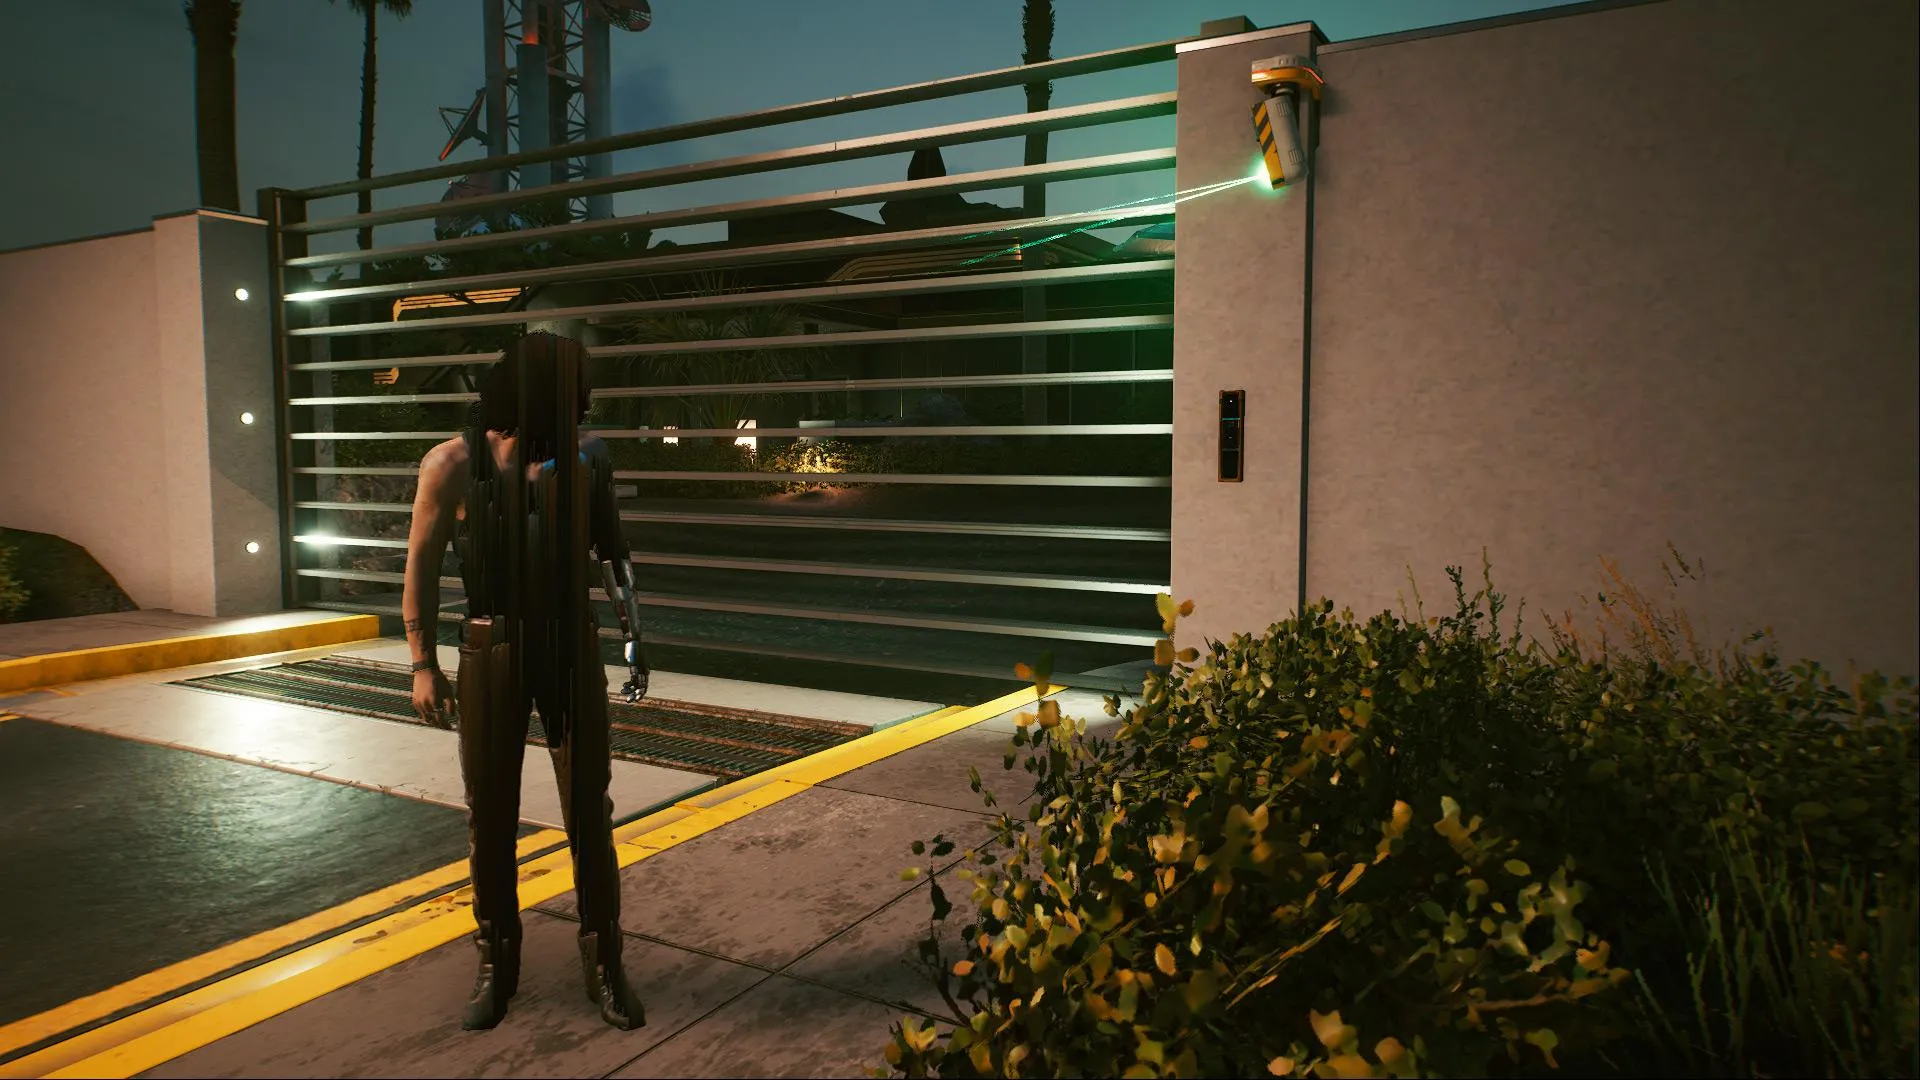 cyberpunk 2077 second conflict side job dennys mansion gate